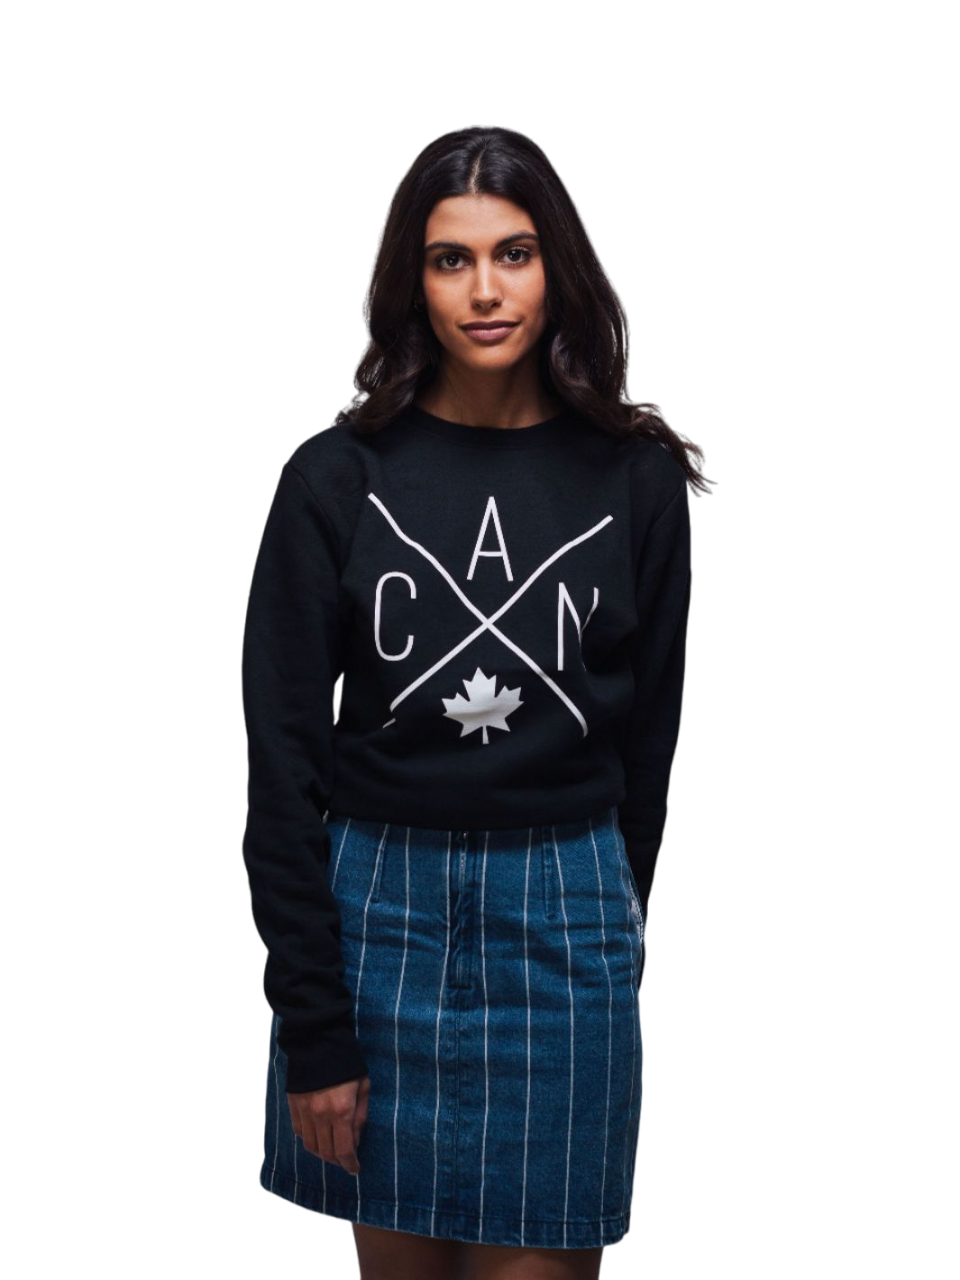 Individual wearing Made in Canada sweater, featuring an exclusive eye catching CAN design featuring a maple leaf.